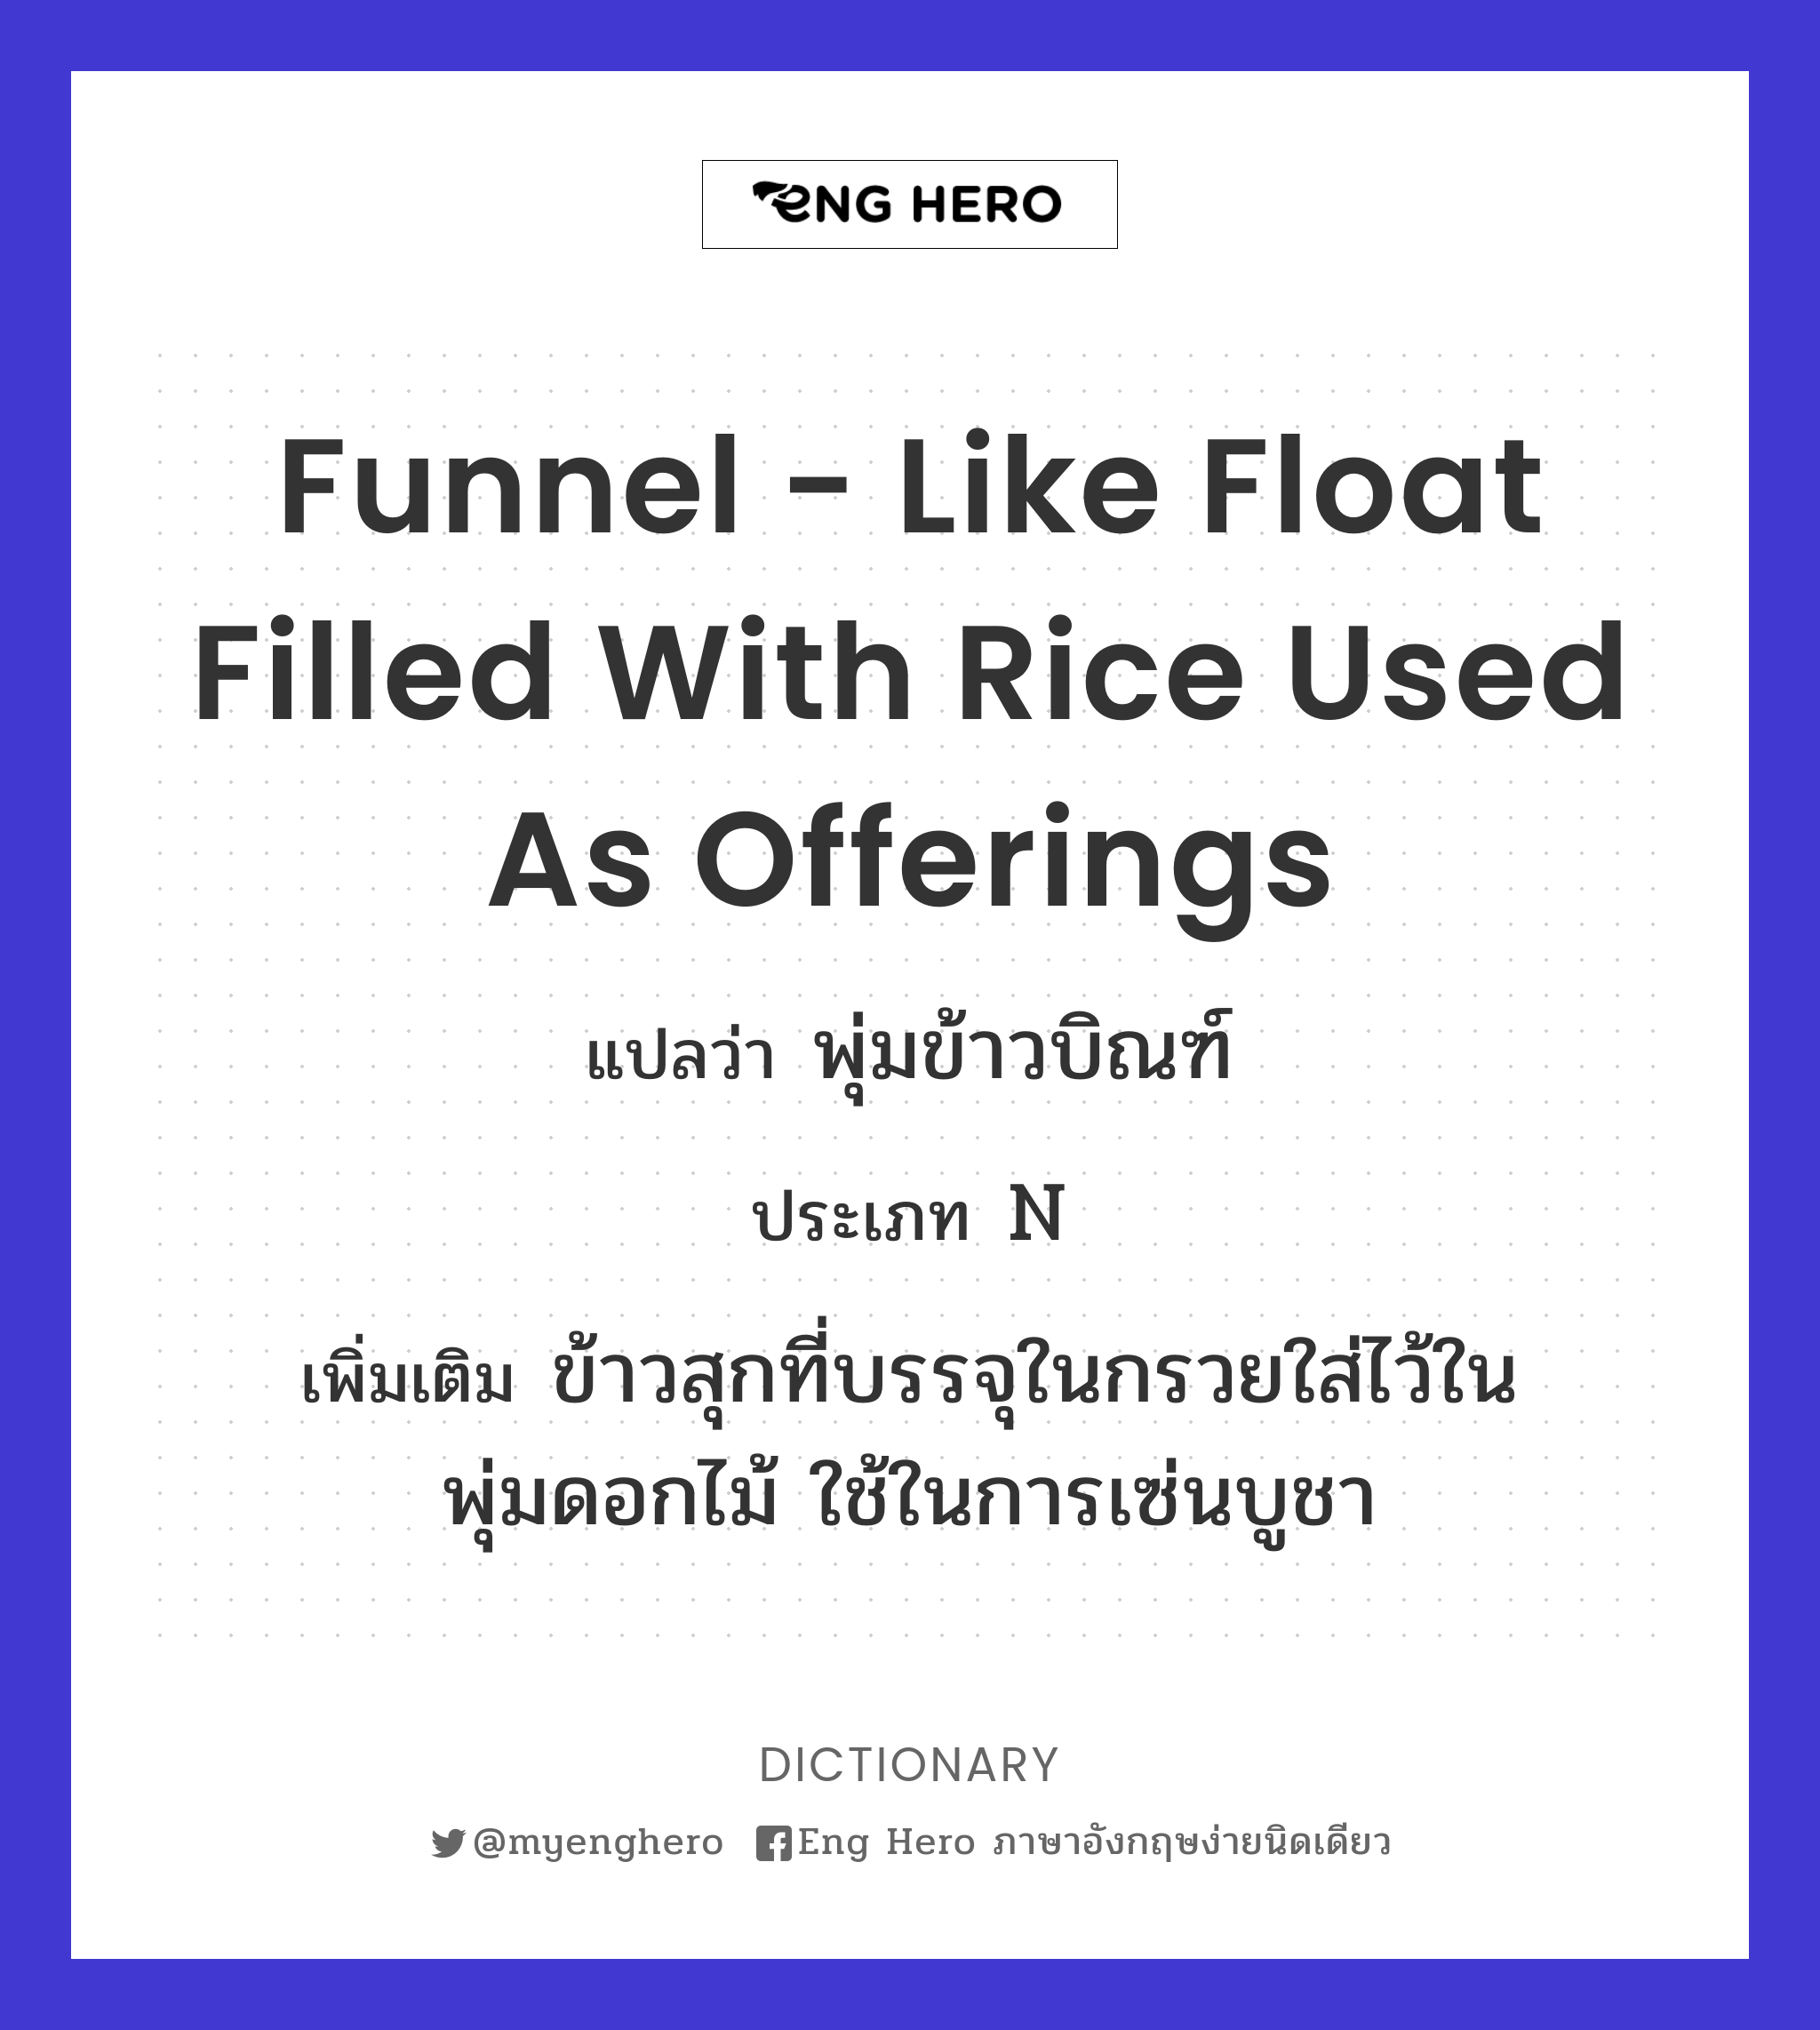 funnel - like float filled with rice used as offerings